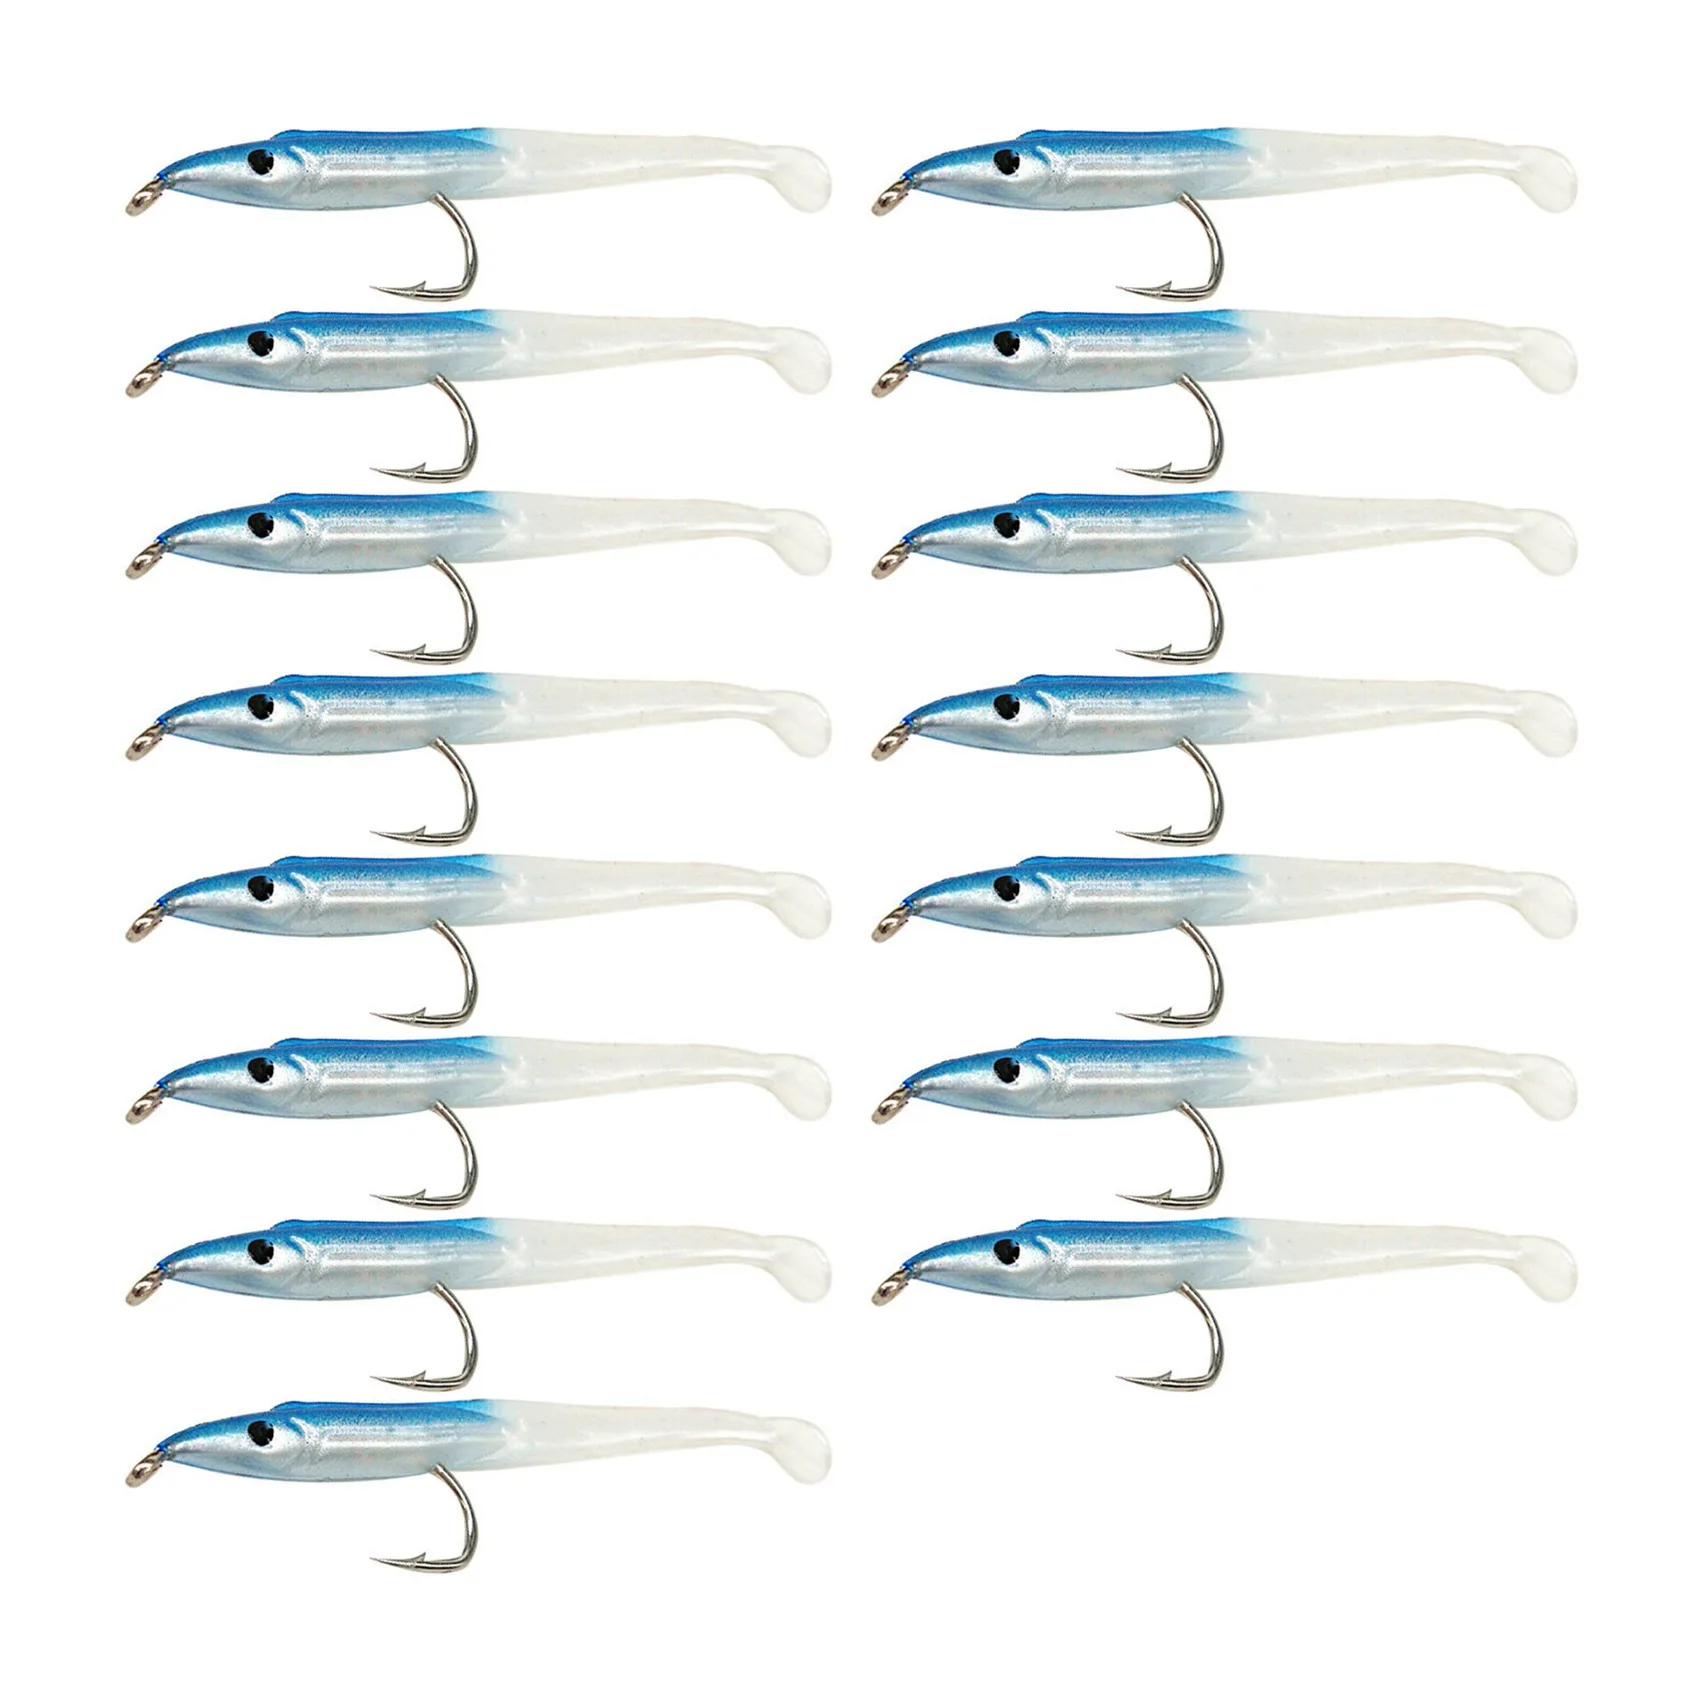 

SUNMILE Fake Fishing Lure Sea Fishing Lure Bait with Hook Eel Bionic Bait 5cm/0.6G T Tail Soft Insect Simulation Bait 15Pcs Blue